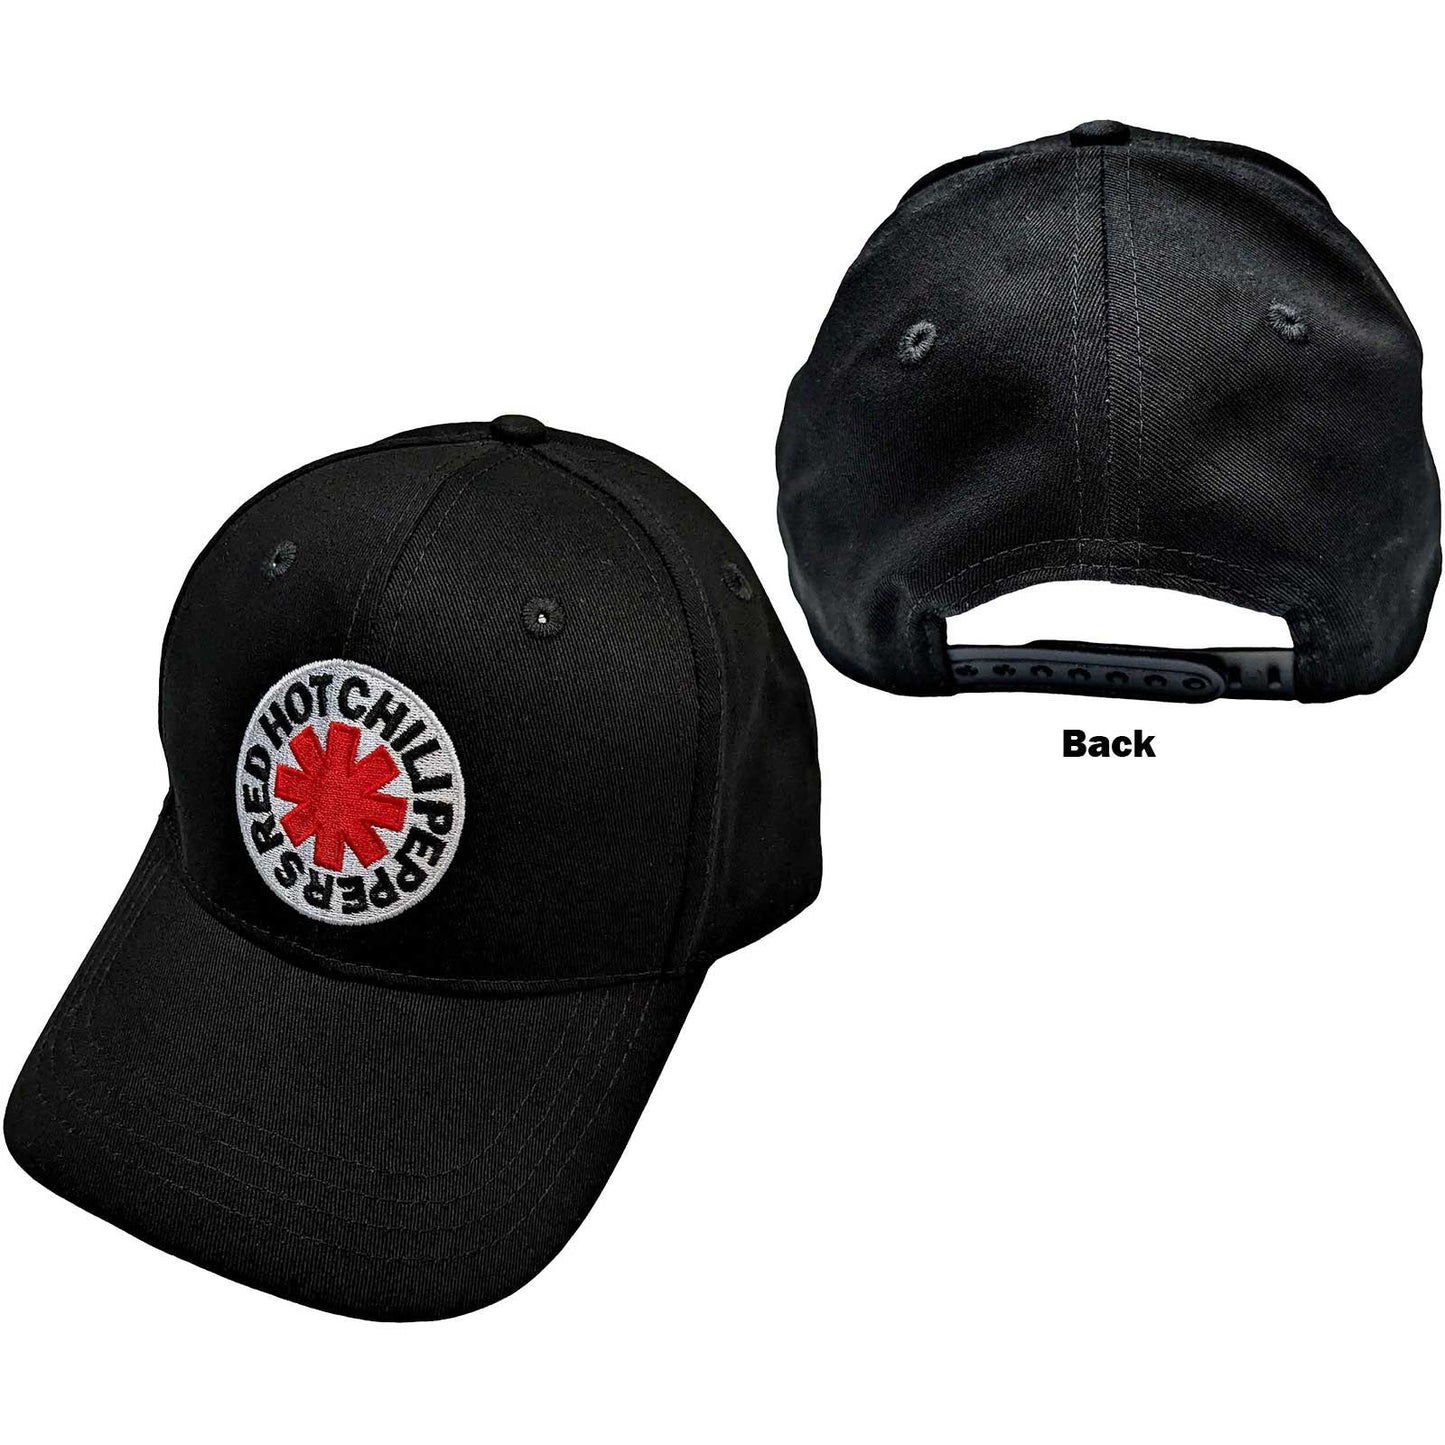 RED HOT CHILI PEPPERS - Classic Asterisk Baseball Cap